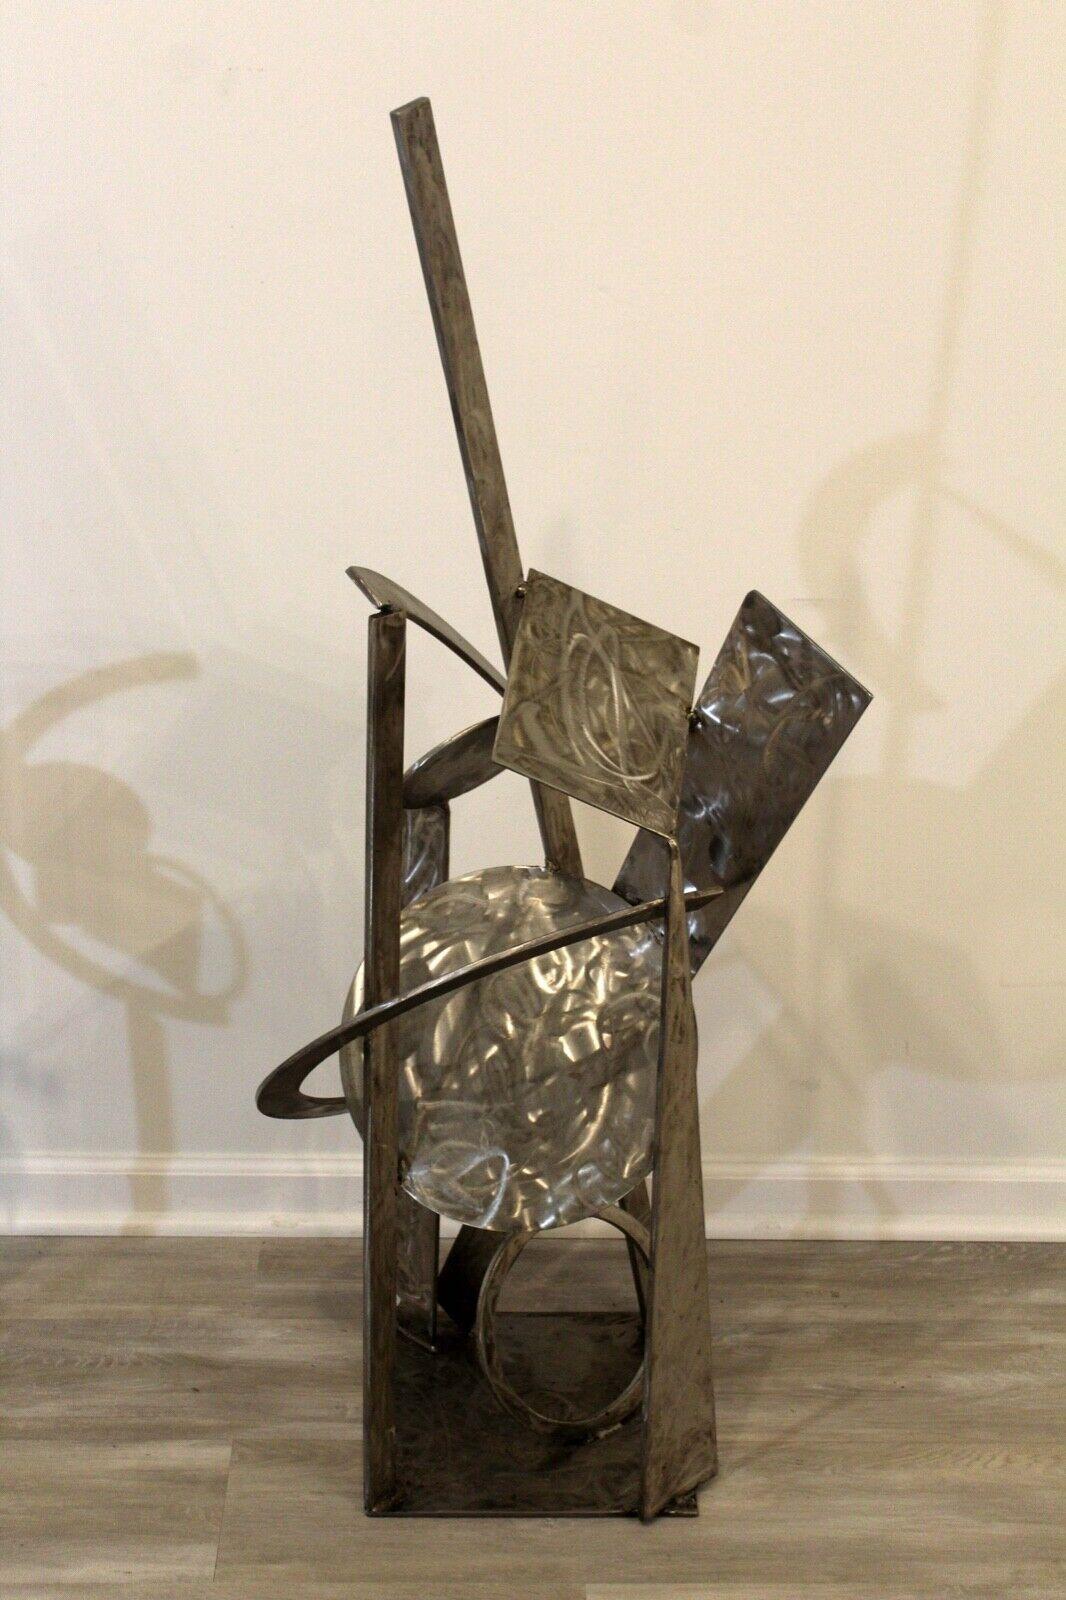 For your consideration is a fantastic large, abstract, stainless steel floor indoor or outdoor sculpture, signed Robert D. Hansen. In excellent condition.

Dimensions: 13.5 W x 17 D x 49 H.